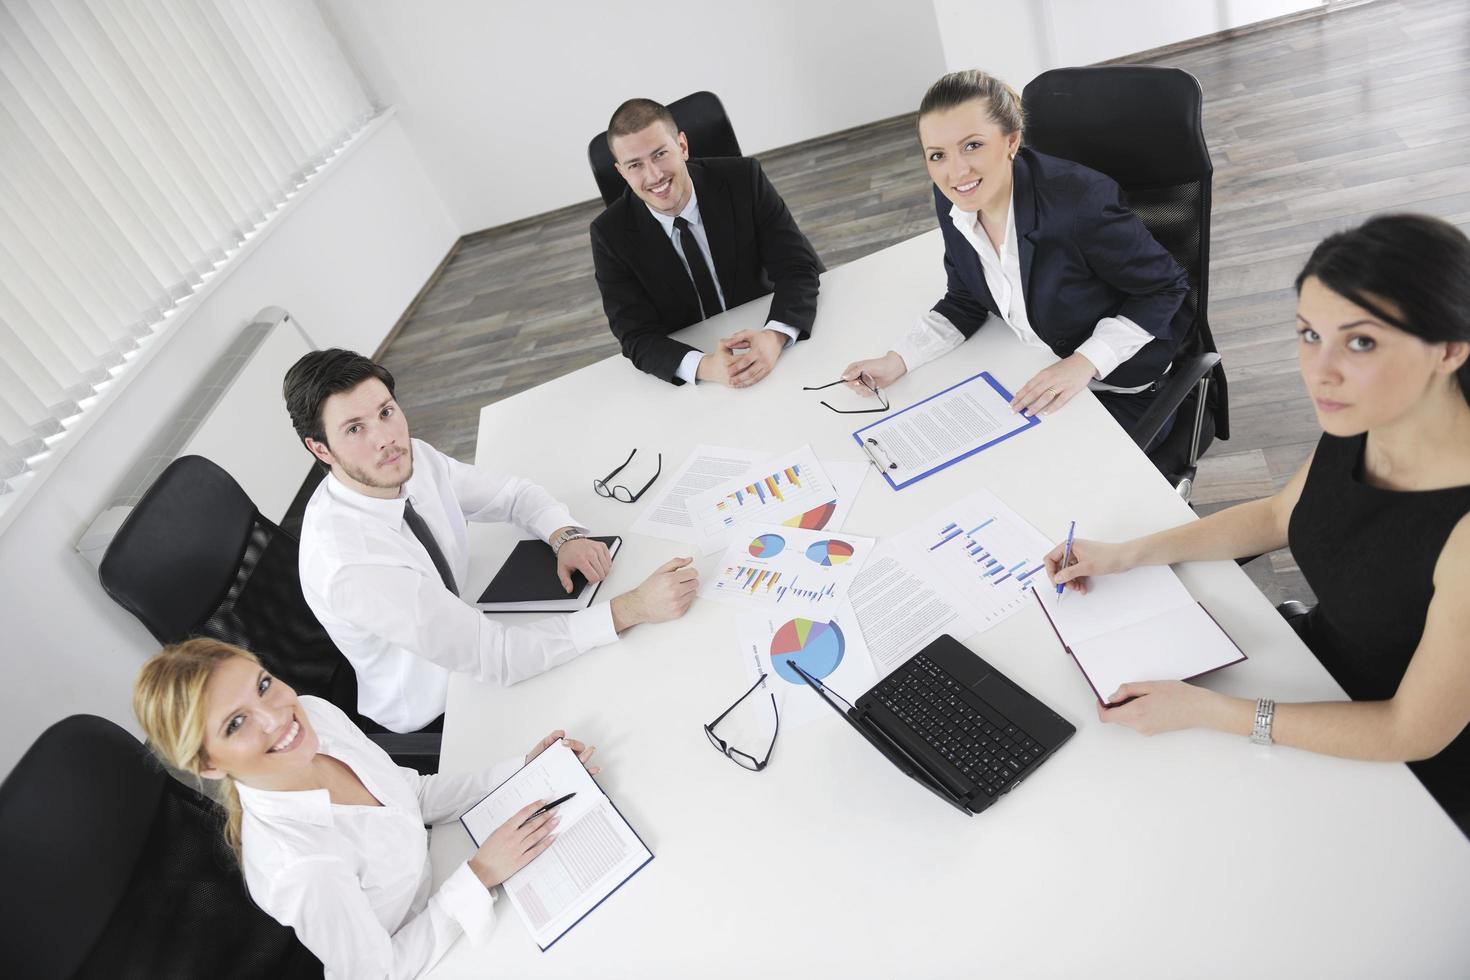 business people in a meeting at office photo